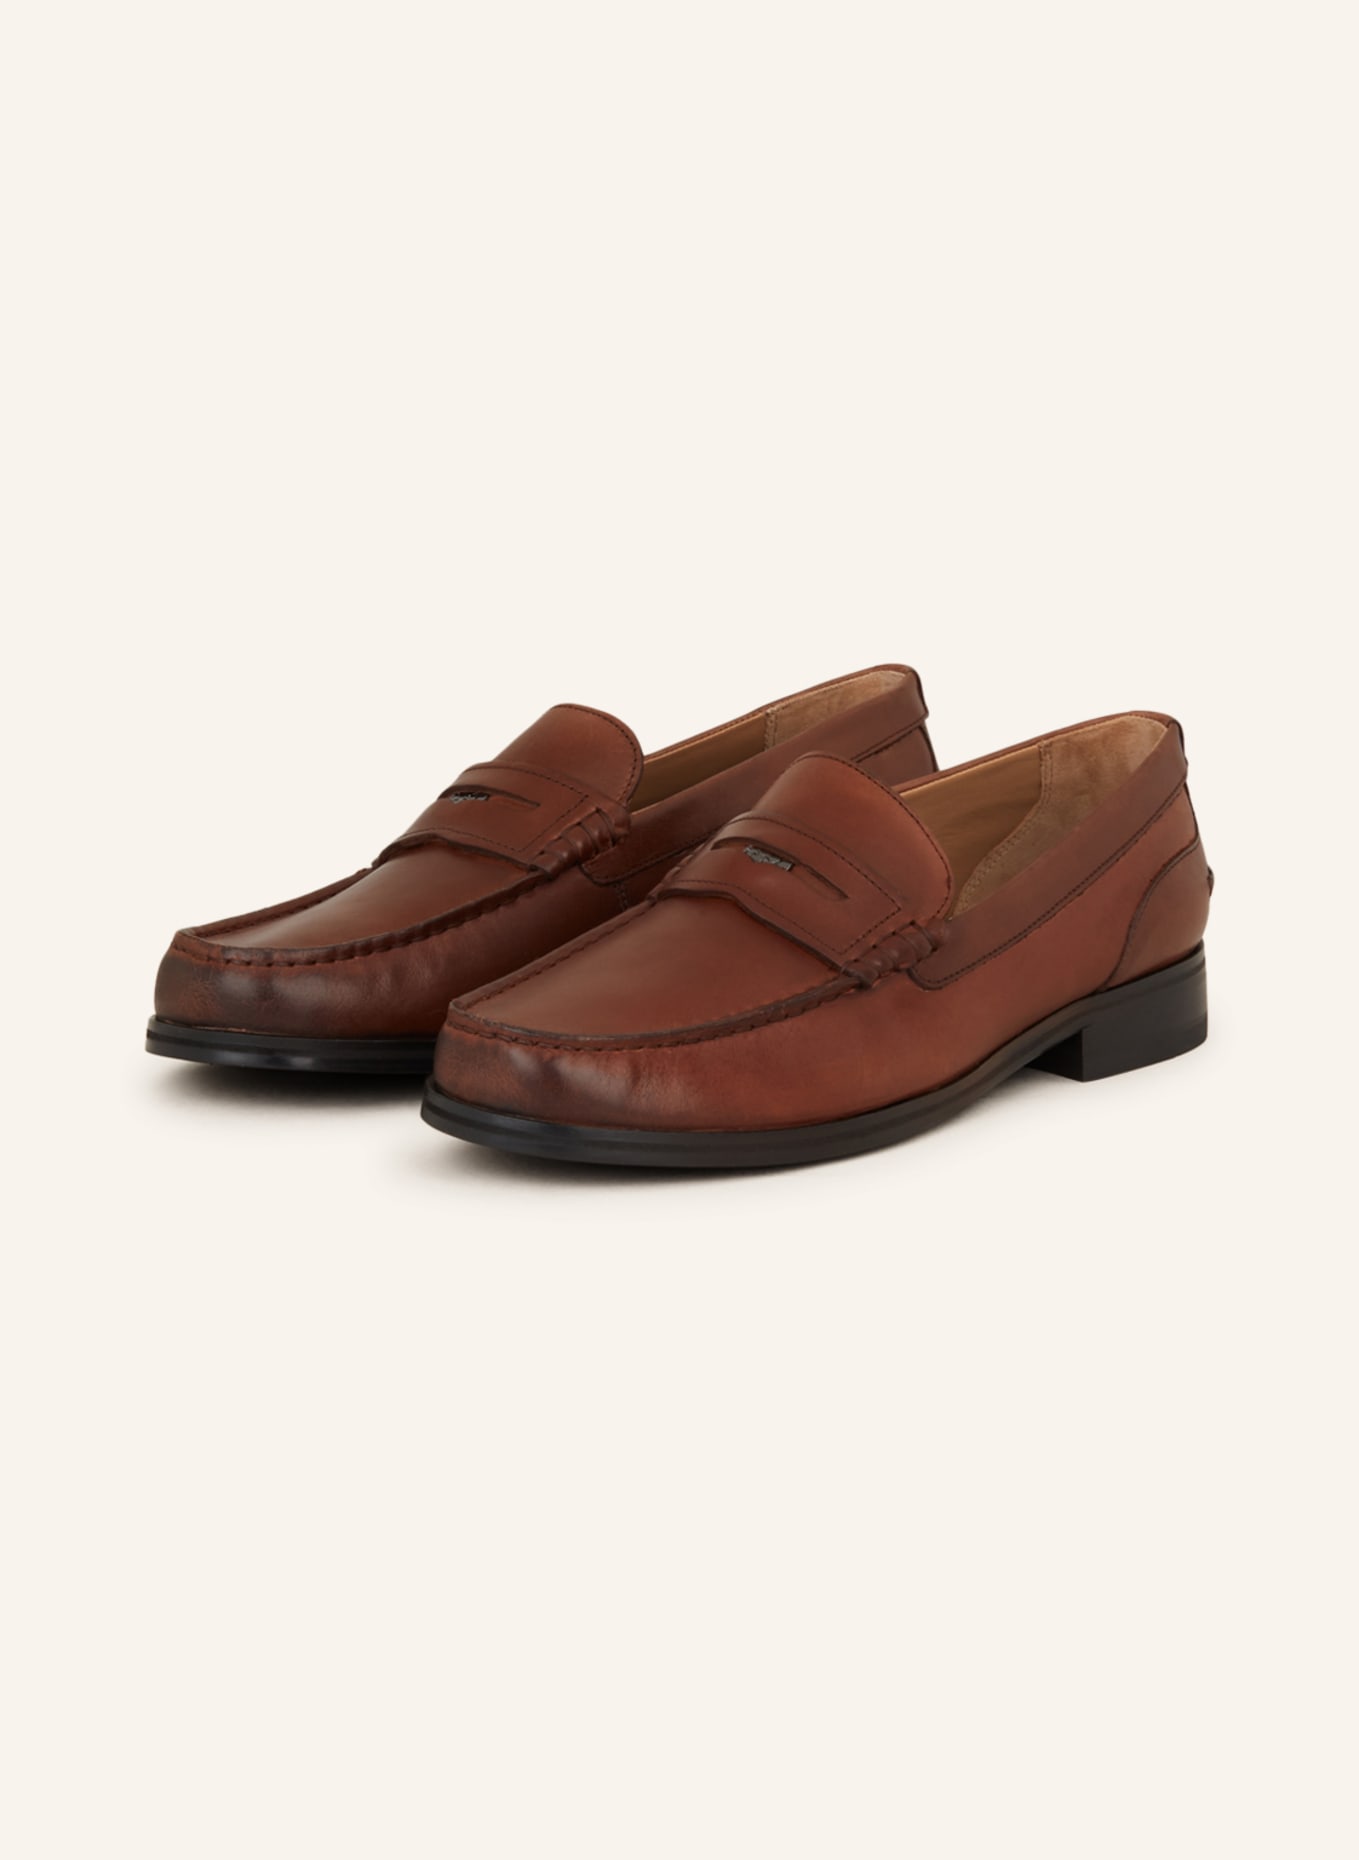 TED BAKER Penny-Loafer TIRYMEW, Farbe: BRAUN (Bild 1)